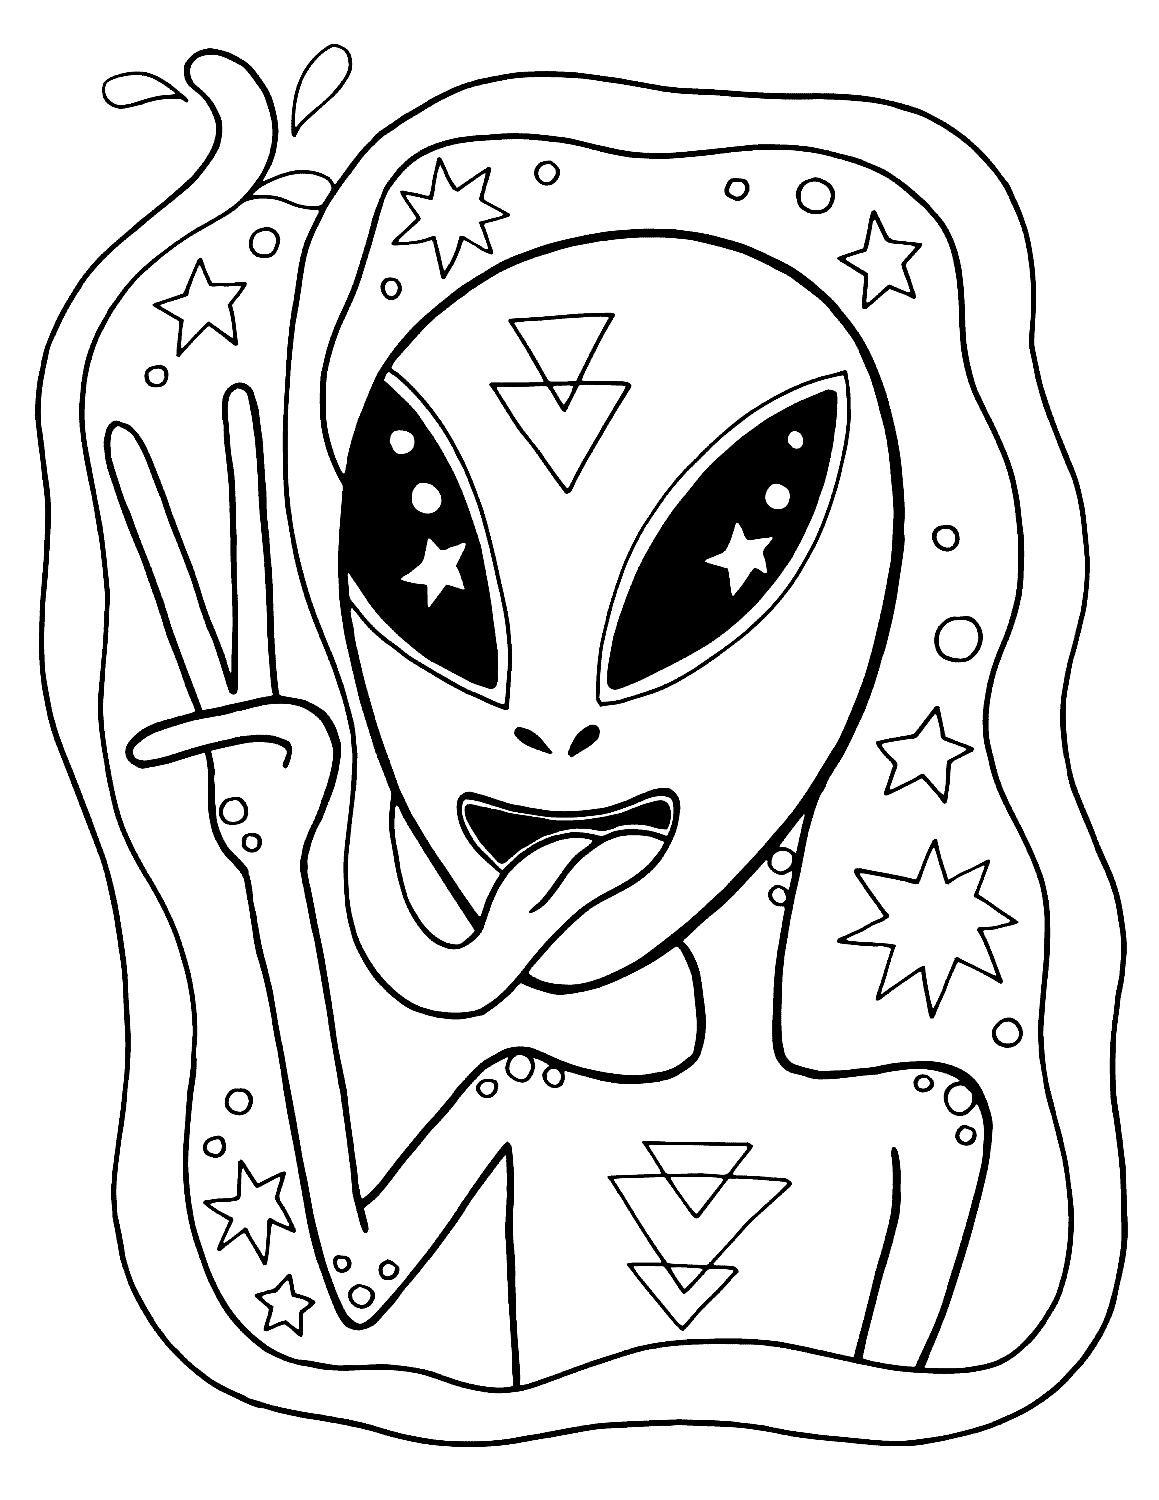 Printable Trippy Alien Coloring Pages   Alien Coloring Pages ...